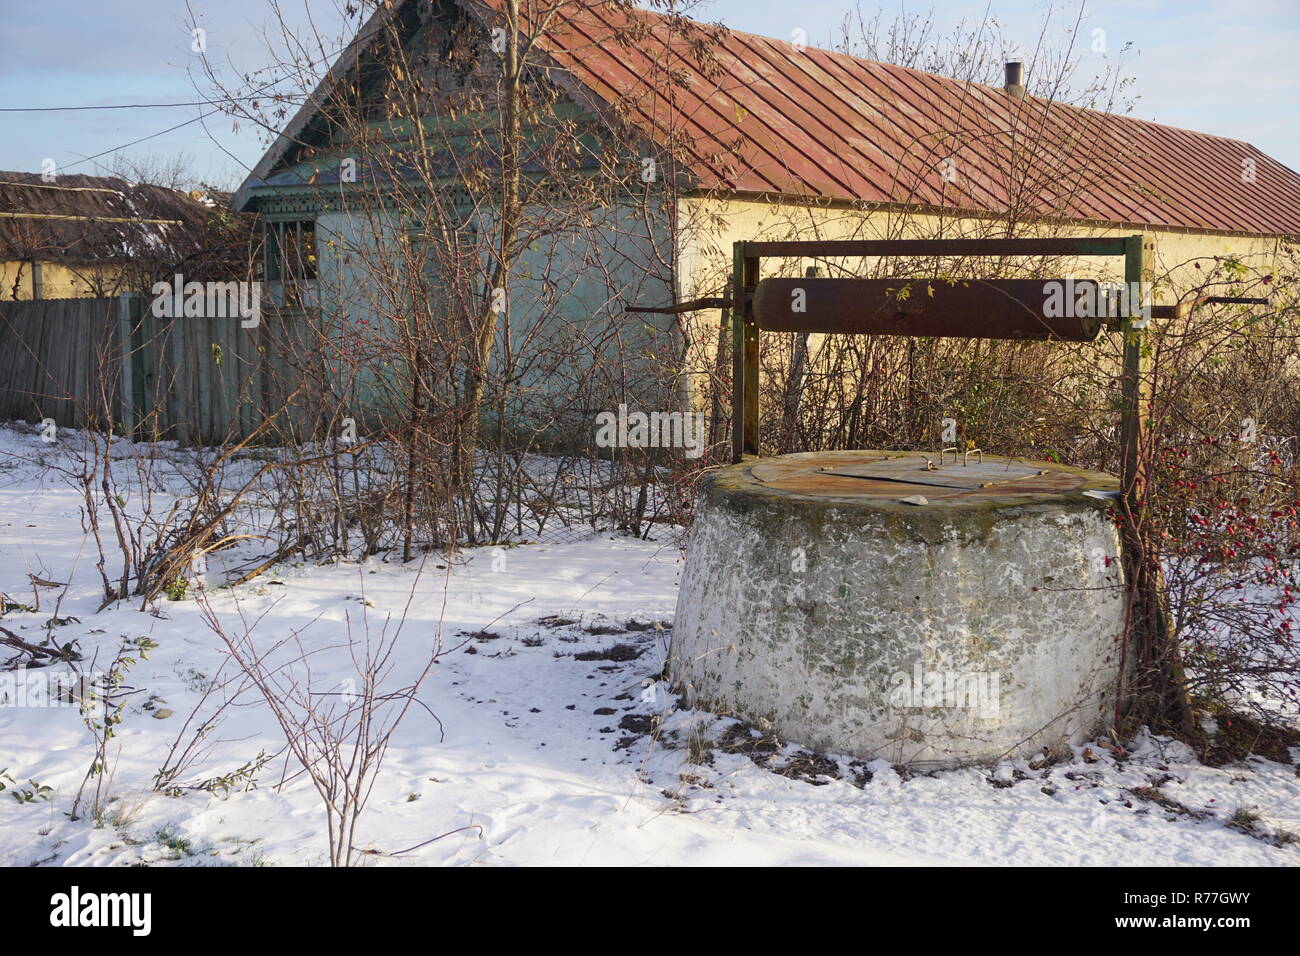 A well in winter, covered by snow Stock Photo